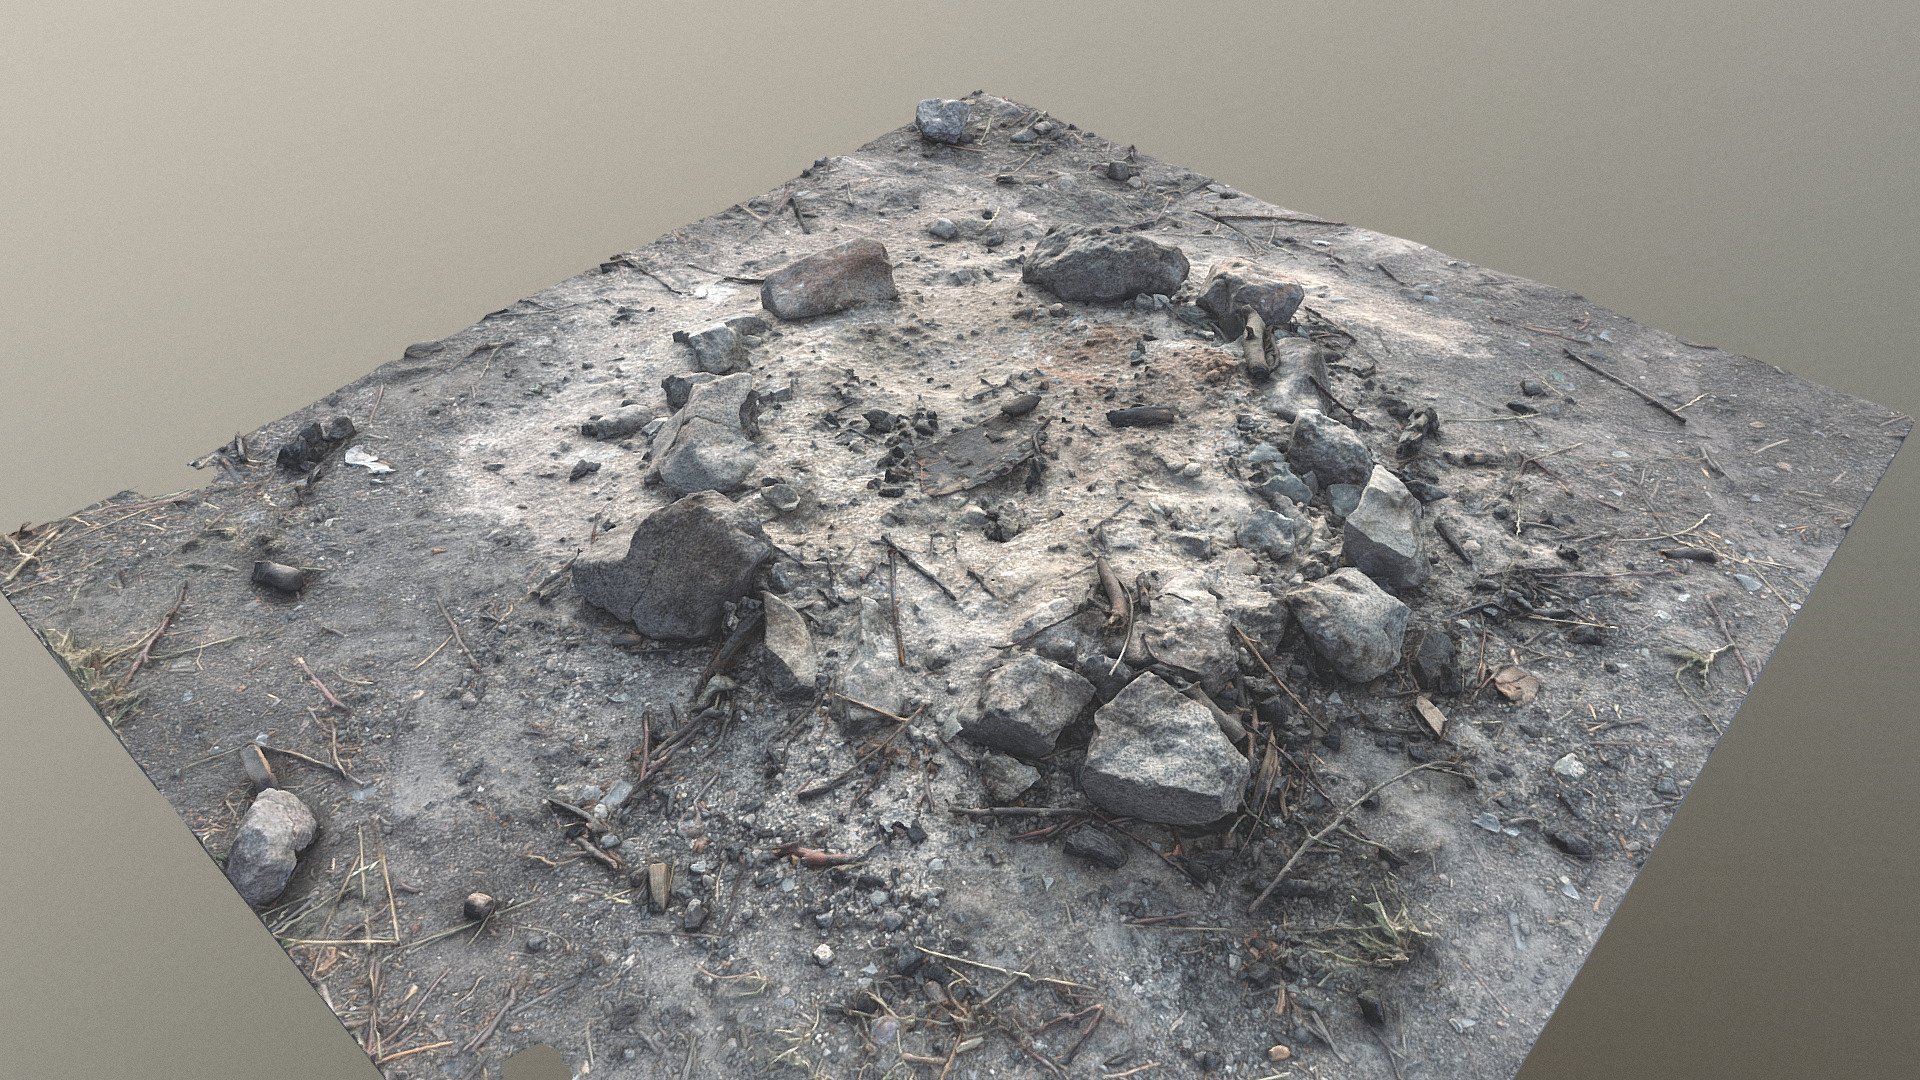 Dusty ash Fireplace fire pit hole, campfire natural made of stones

photogrametry scan (24MP, 100+) - Fireplace fire pit hole campfire made of stones - Buy Royalty Free 3D model by matousekfoto 3d model